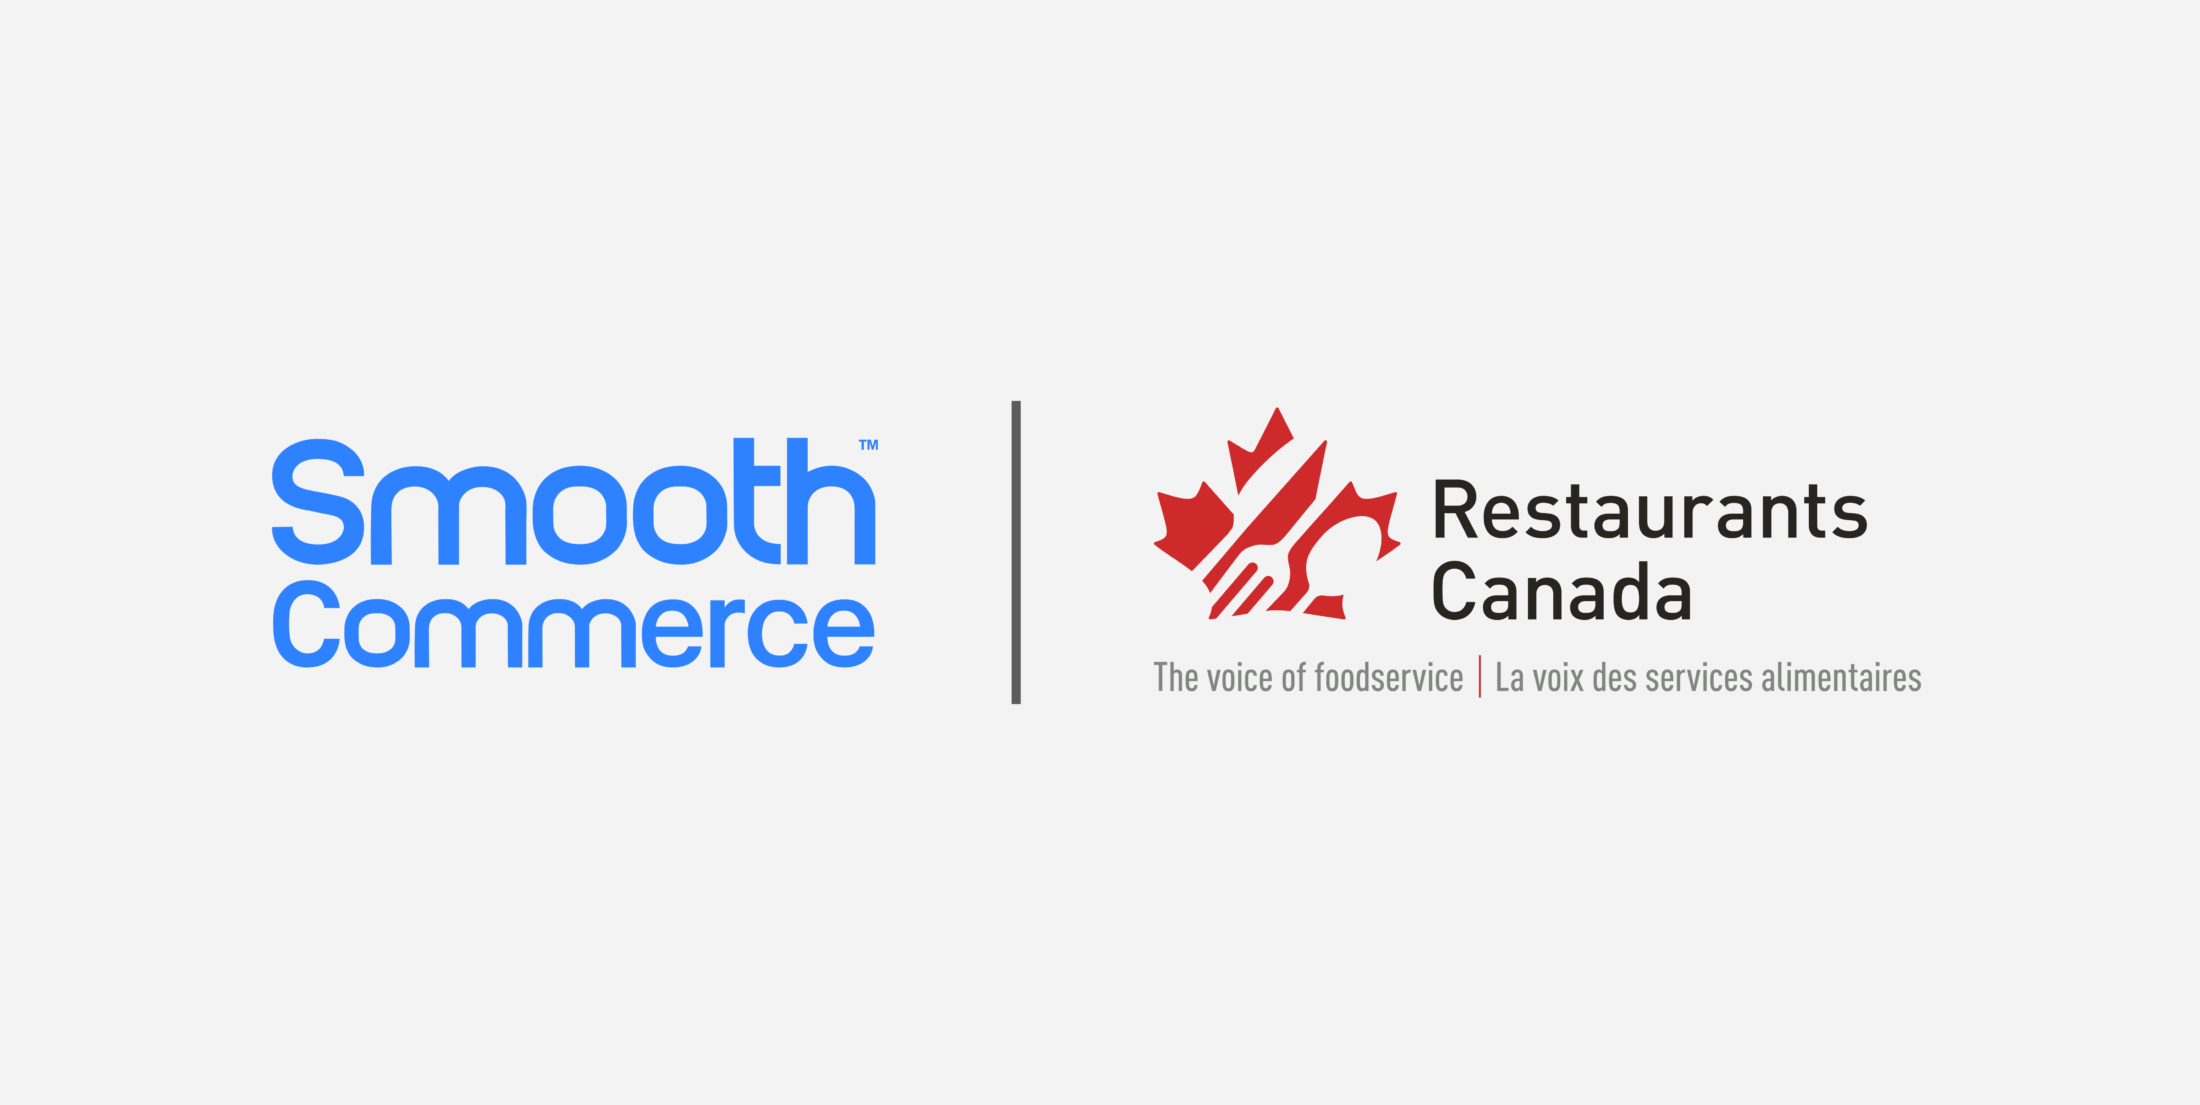 Smooth Commerce and Restaurants Canada logos